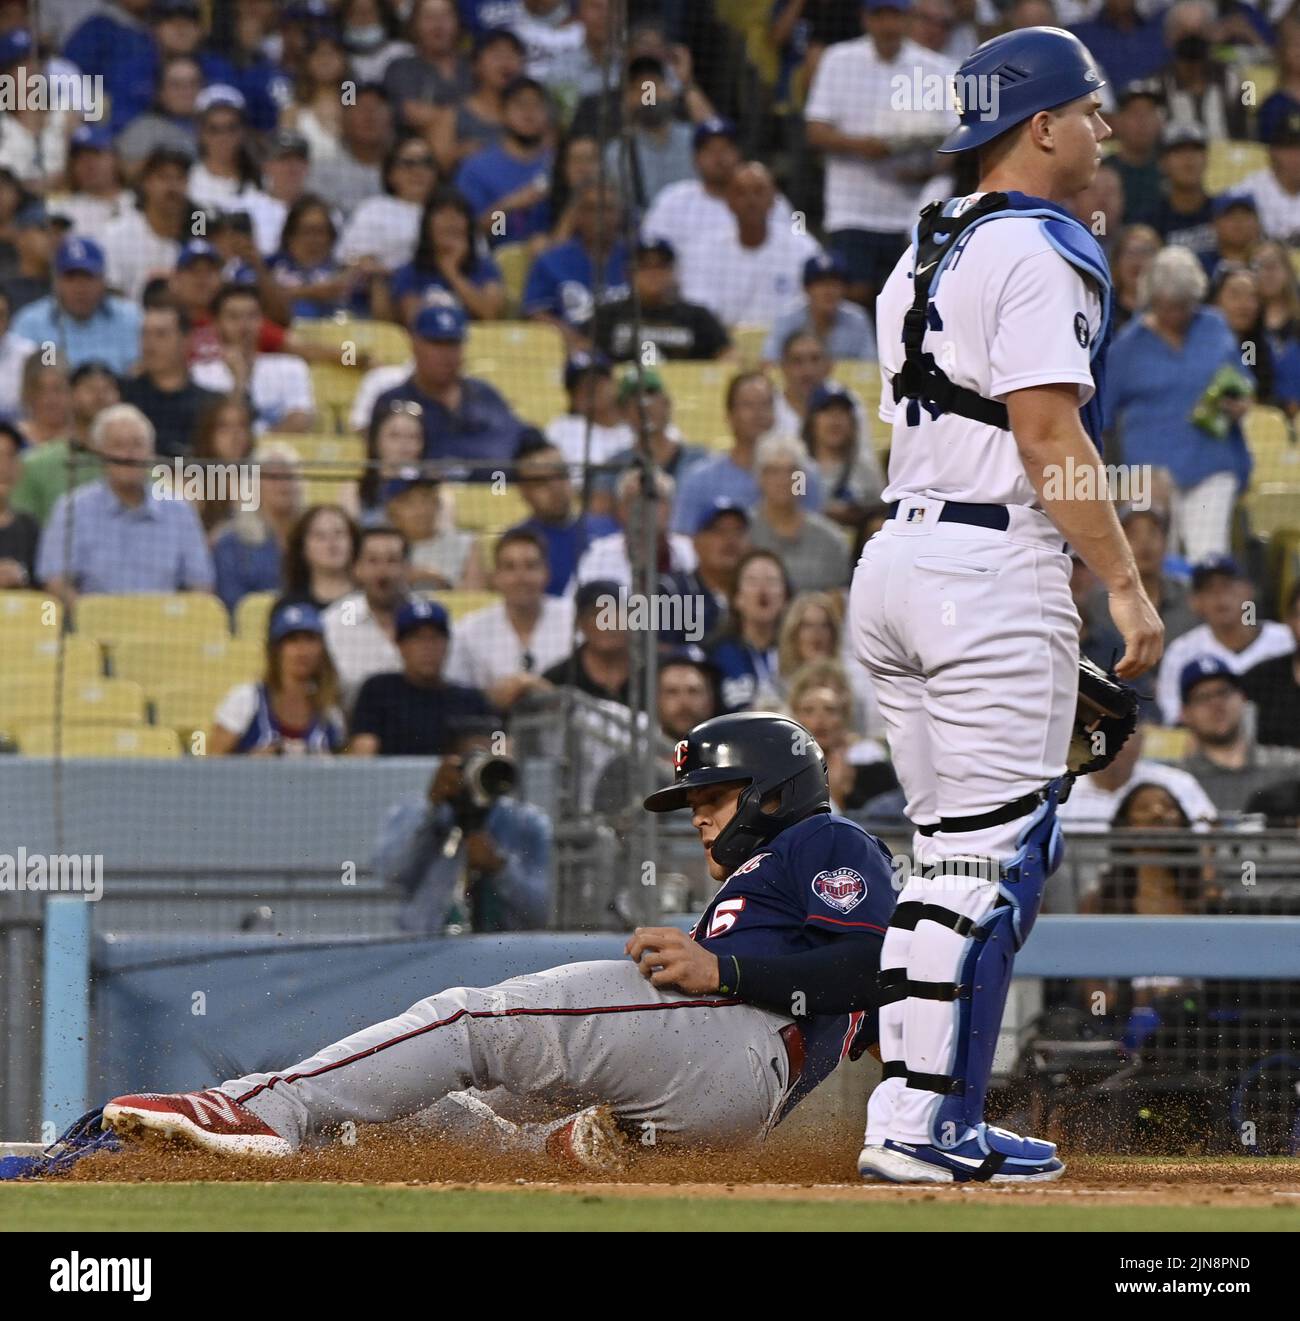 Los Angeles, United States. 10th Aug, 2022. Minnesota Twins Gio Urshela, who hit a triple off Los Angeles Dodgers starting pitcher Julio Urias, scores from third on a slow roller up the third-base line during the second inning at Dodger Stadium on Tuesday, August 9, 2022. Photo by Jim Ruymen/UPI Credit: UPI/Alamy Live News Stock Photo